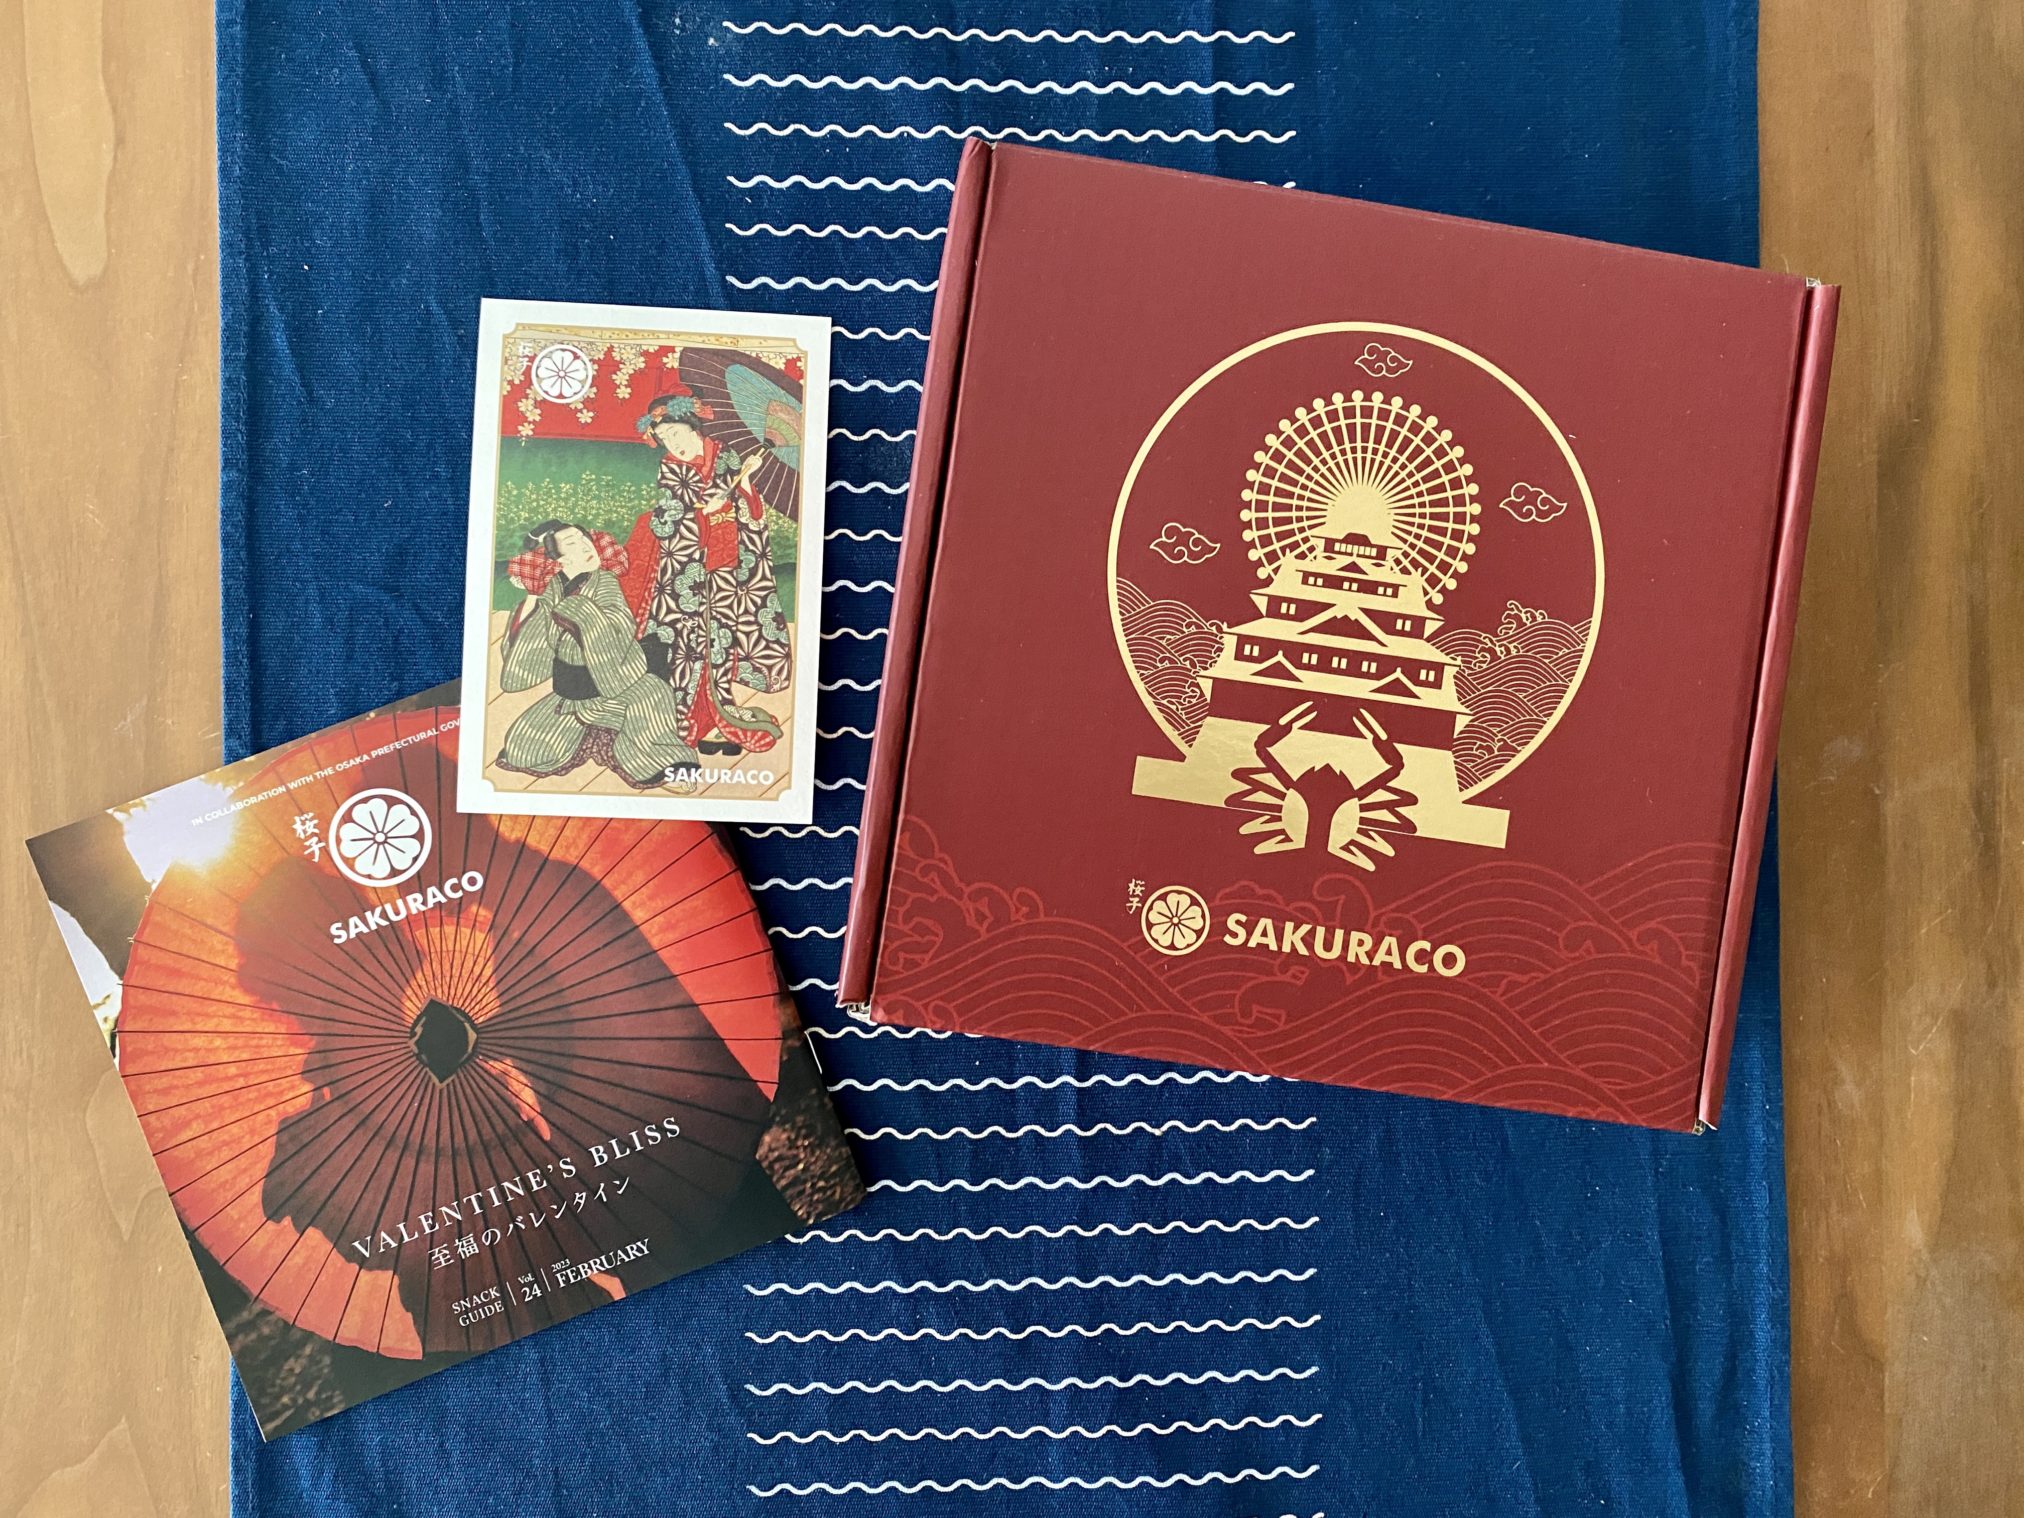 Sakuraco Snack Box Review - Is It Worth The Money?